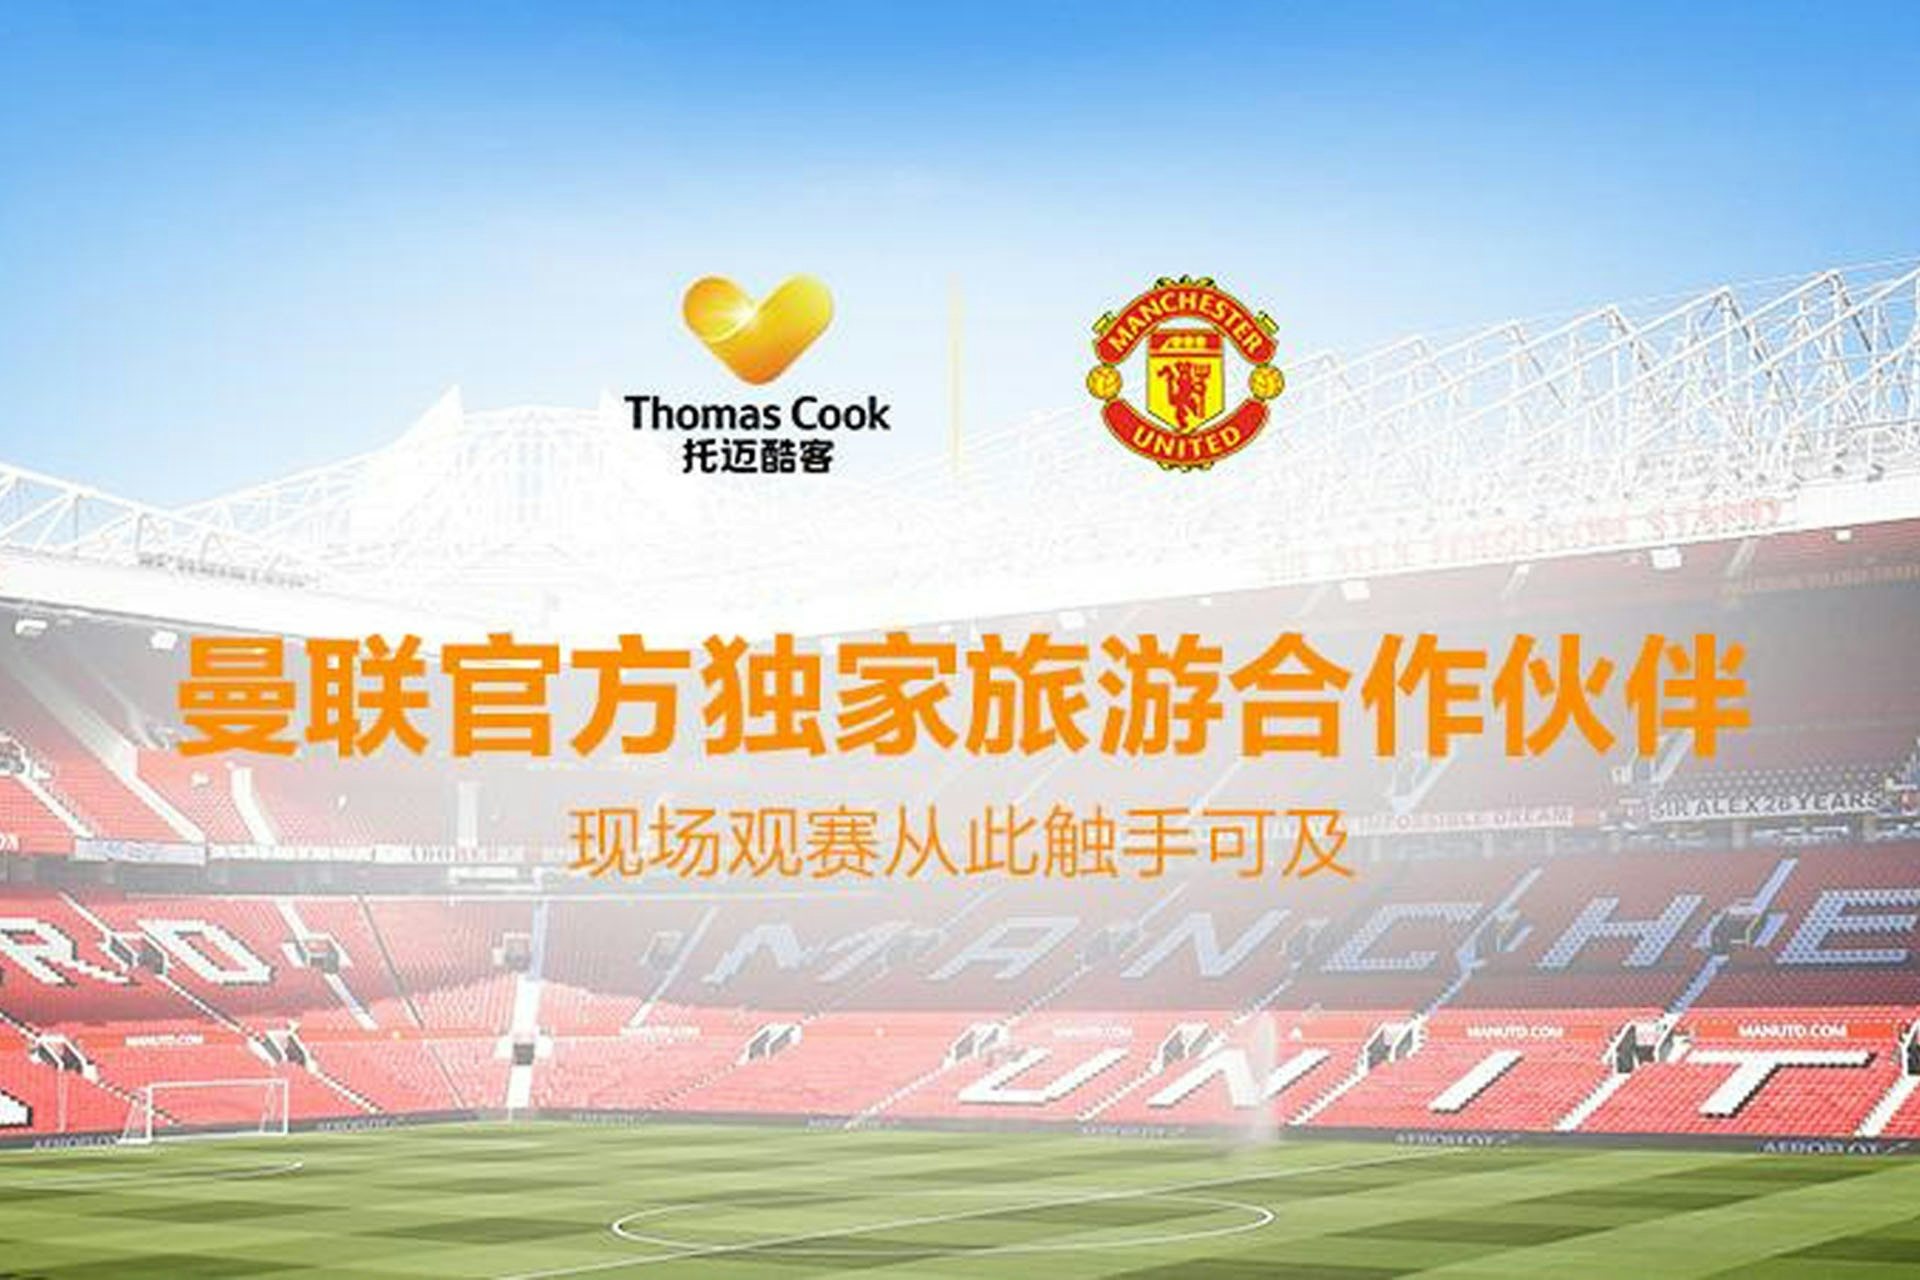 Thomas Cook leverages its exclusive partnership with Manchester United to promote its tourism products in China. (Courtesy Photo)